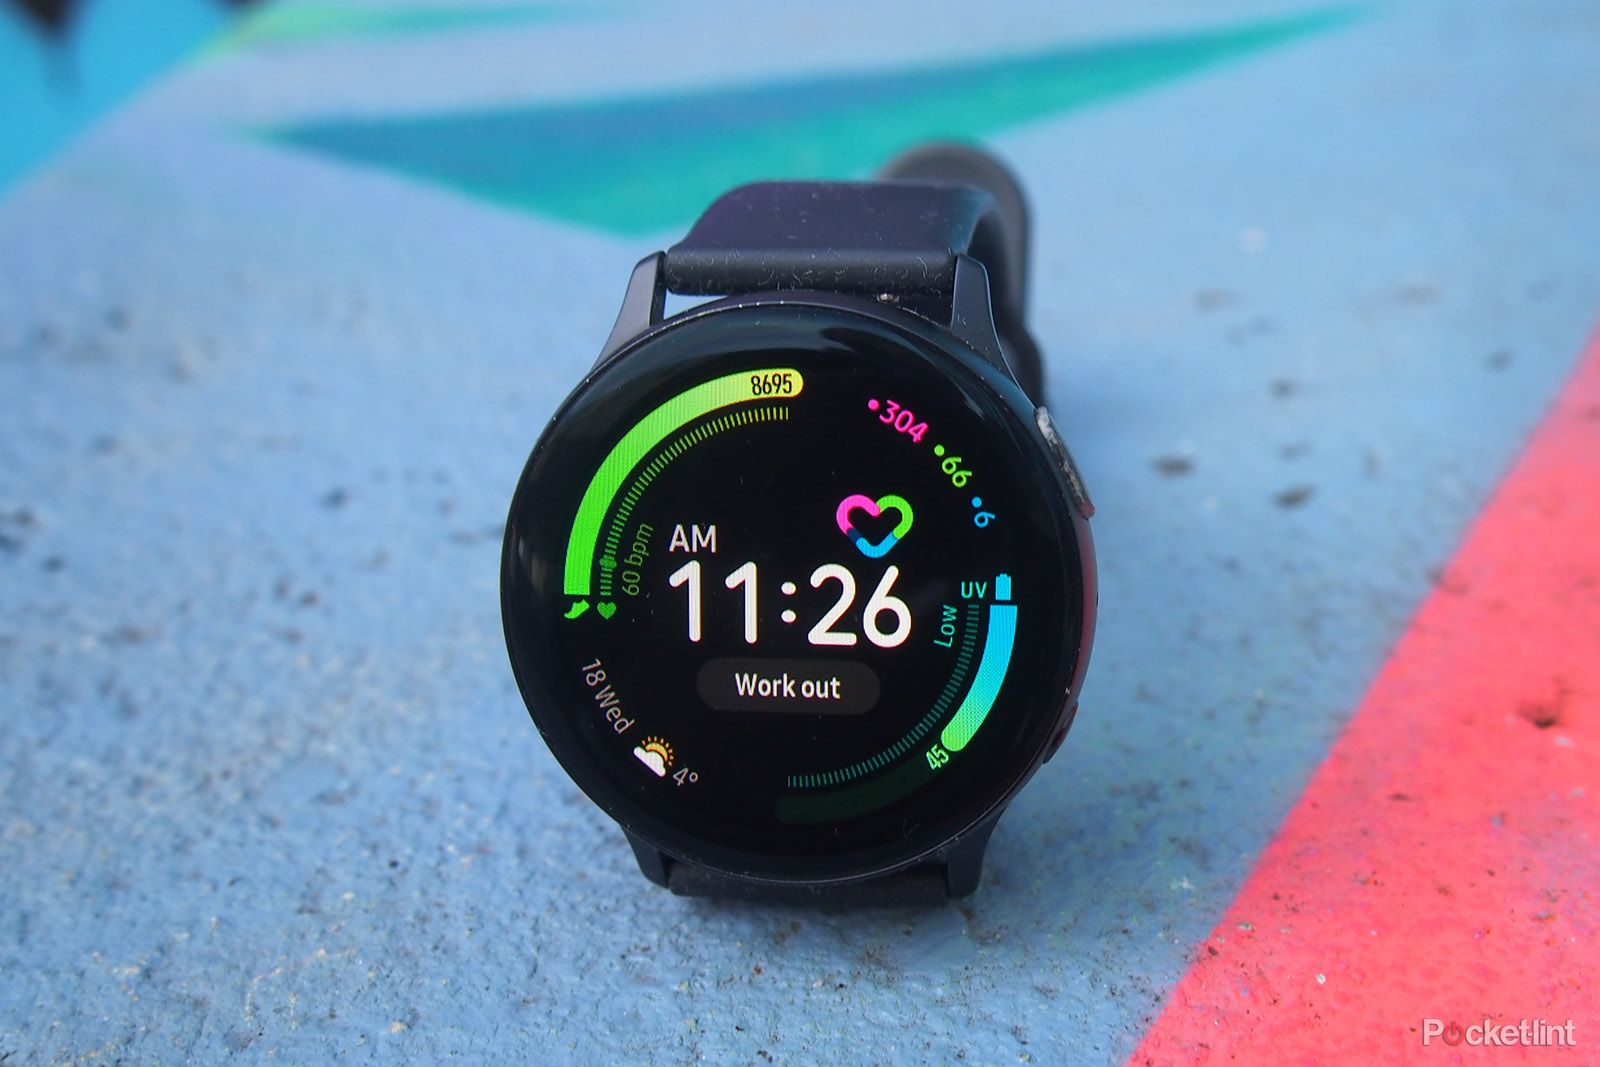 The next Samsung Galaxy Watch 2 will have double the storage image 1